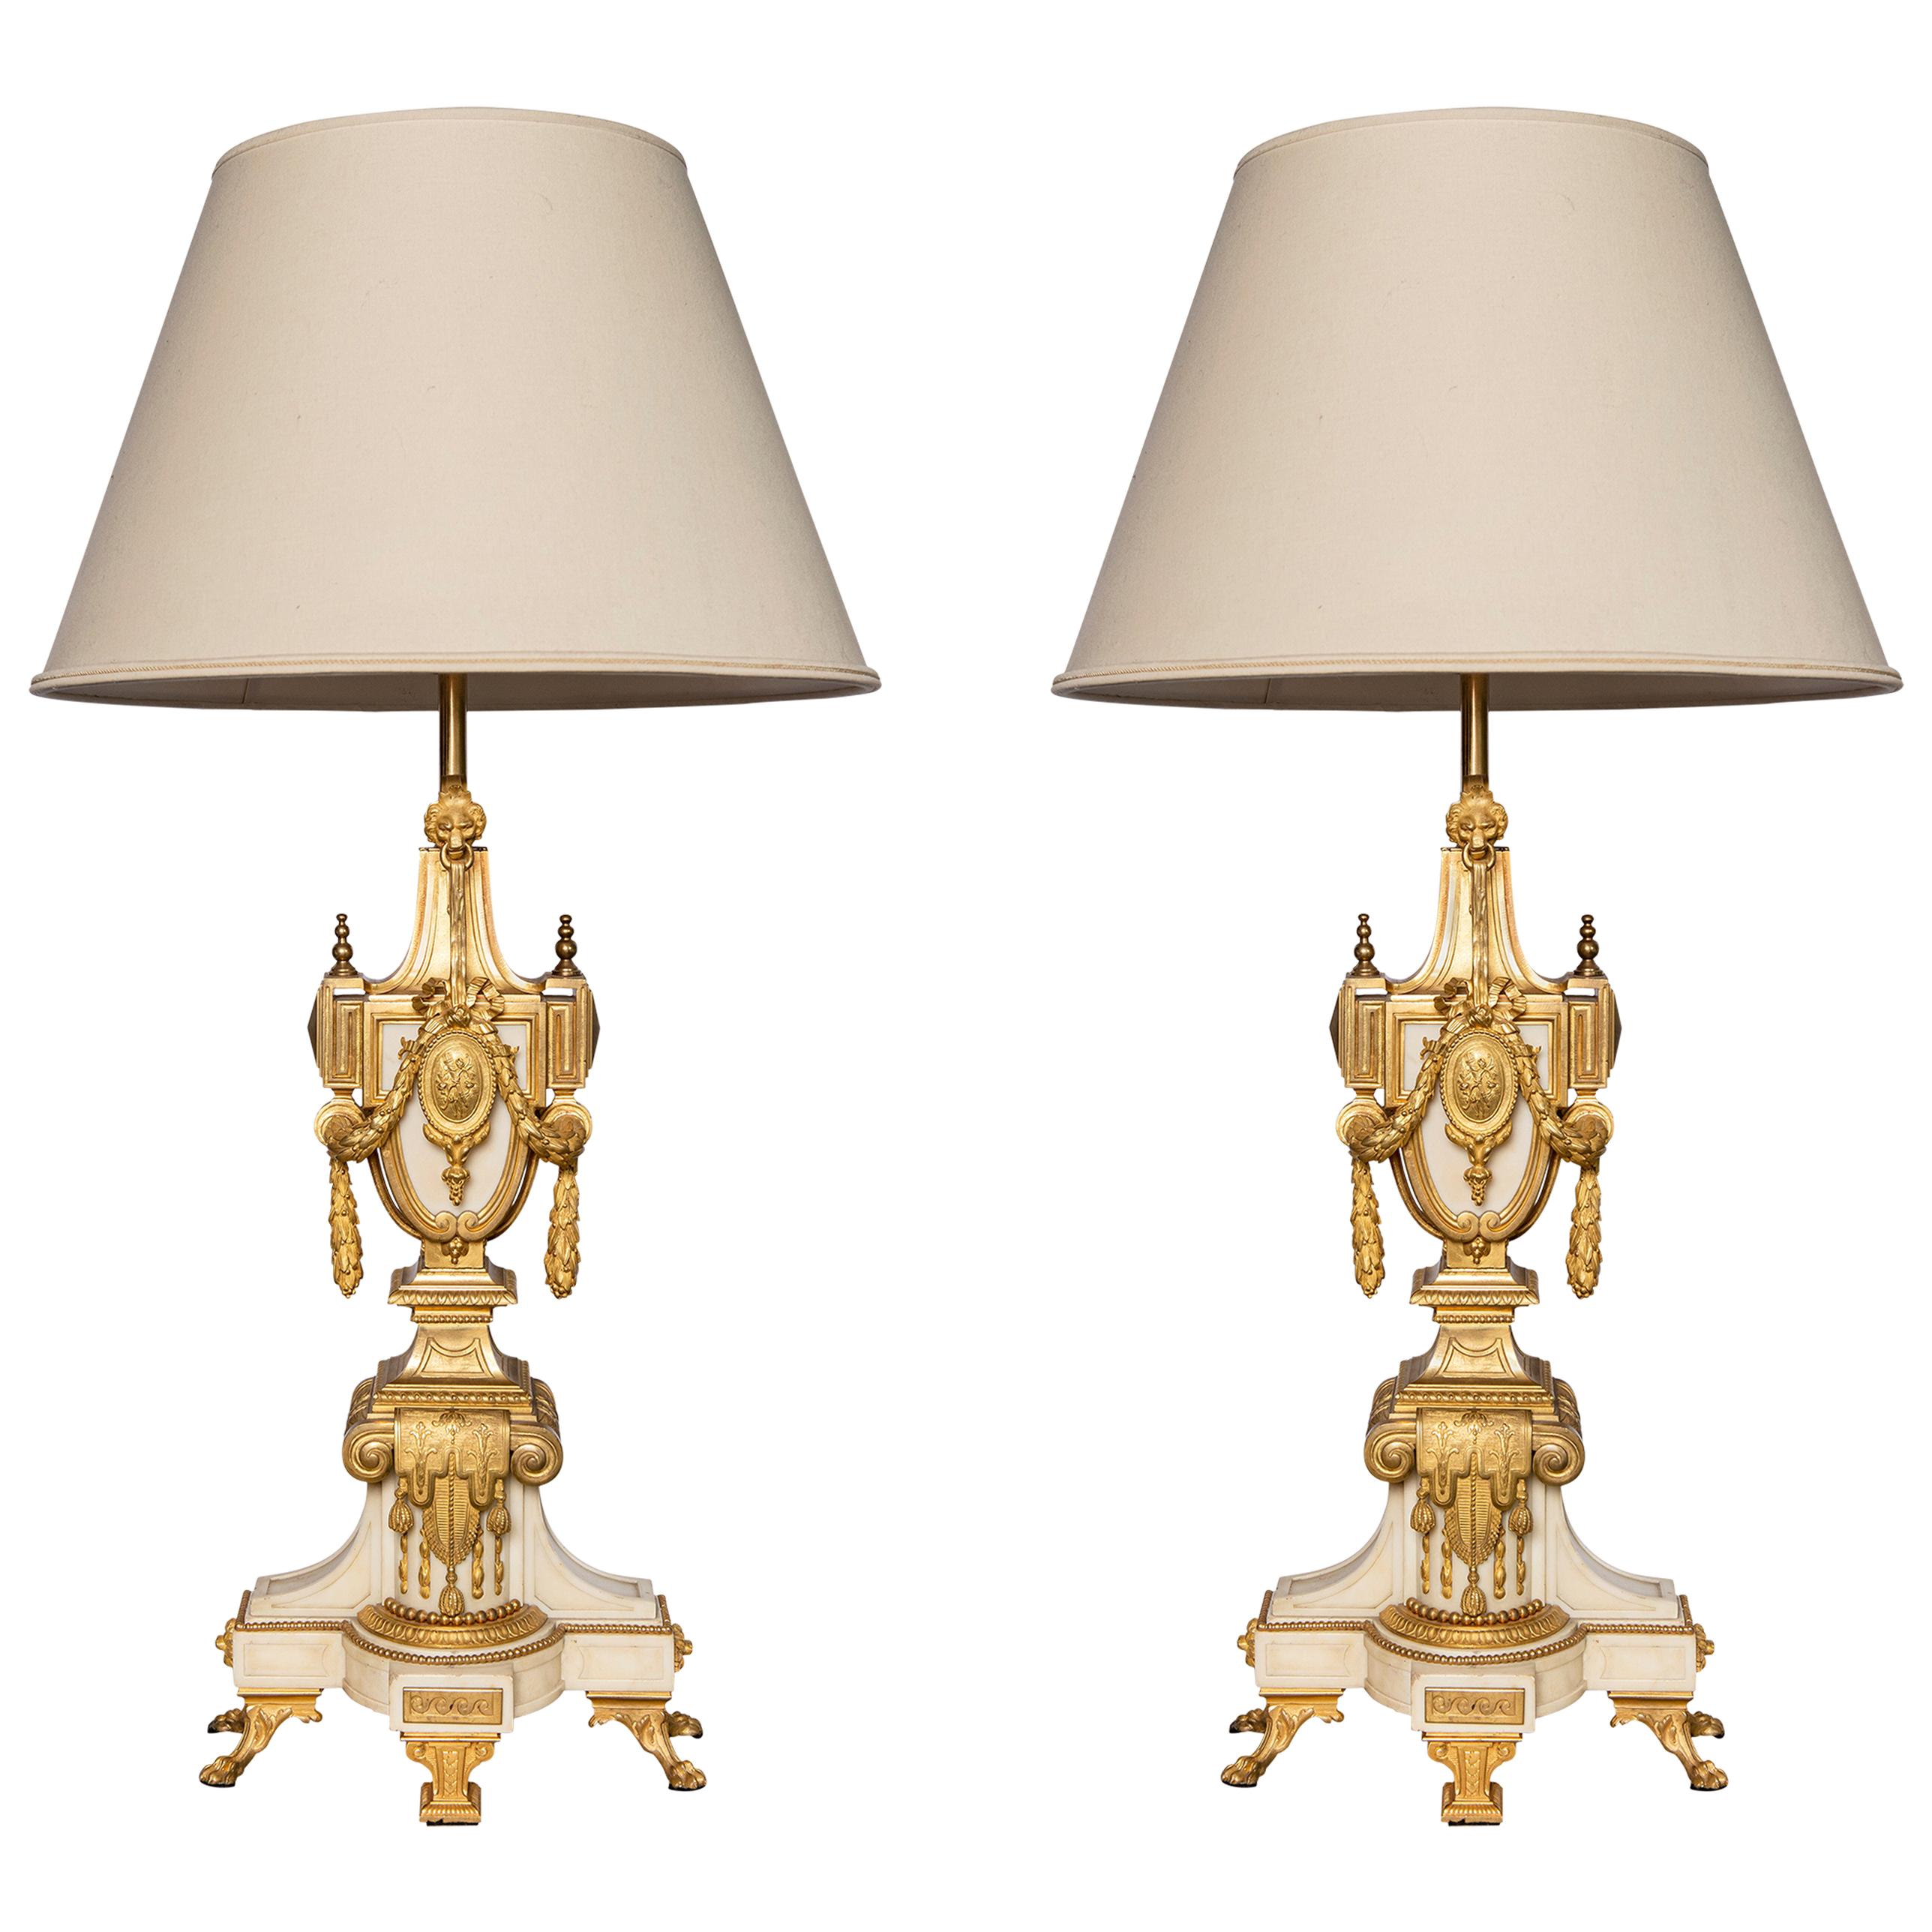 Pair of Marble and Gilt Bronze Table Lamps, Signed F. Barbedienne